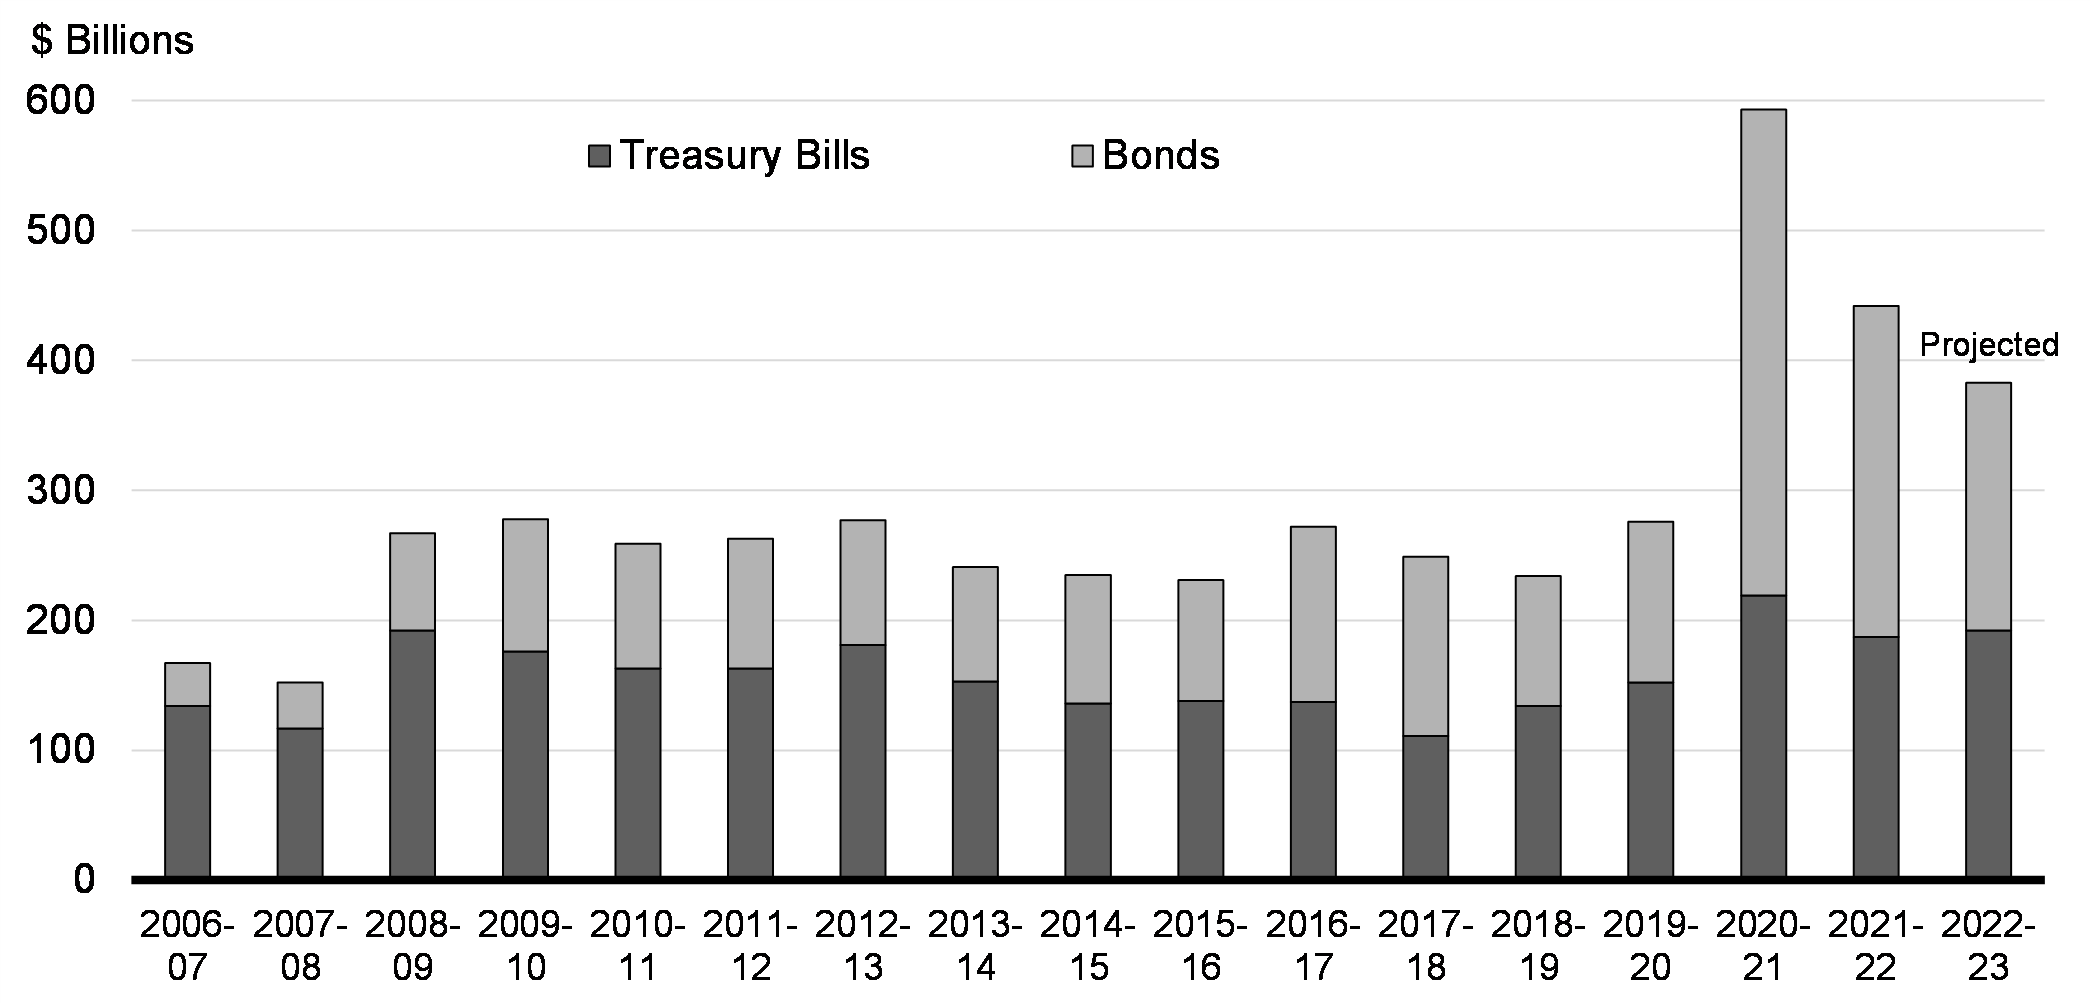 Chart A2.1: Government of Canada Total Gross Issuance by Fiscal Year 